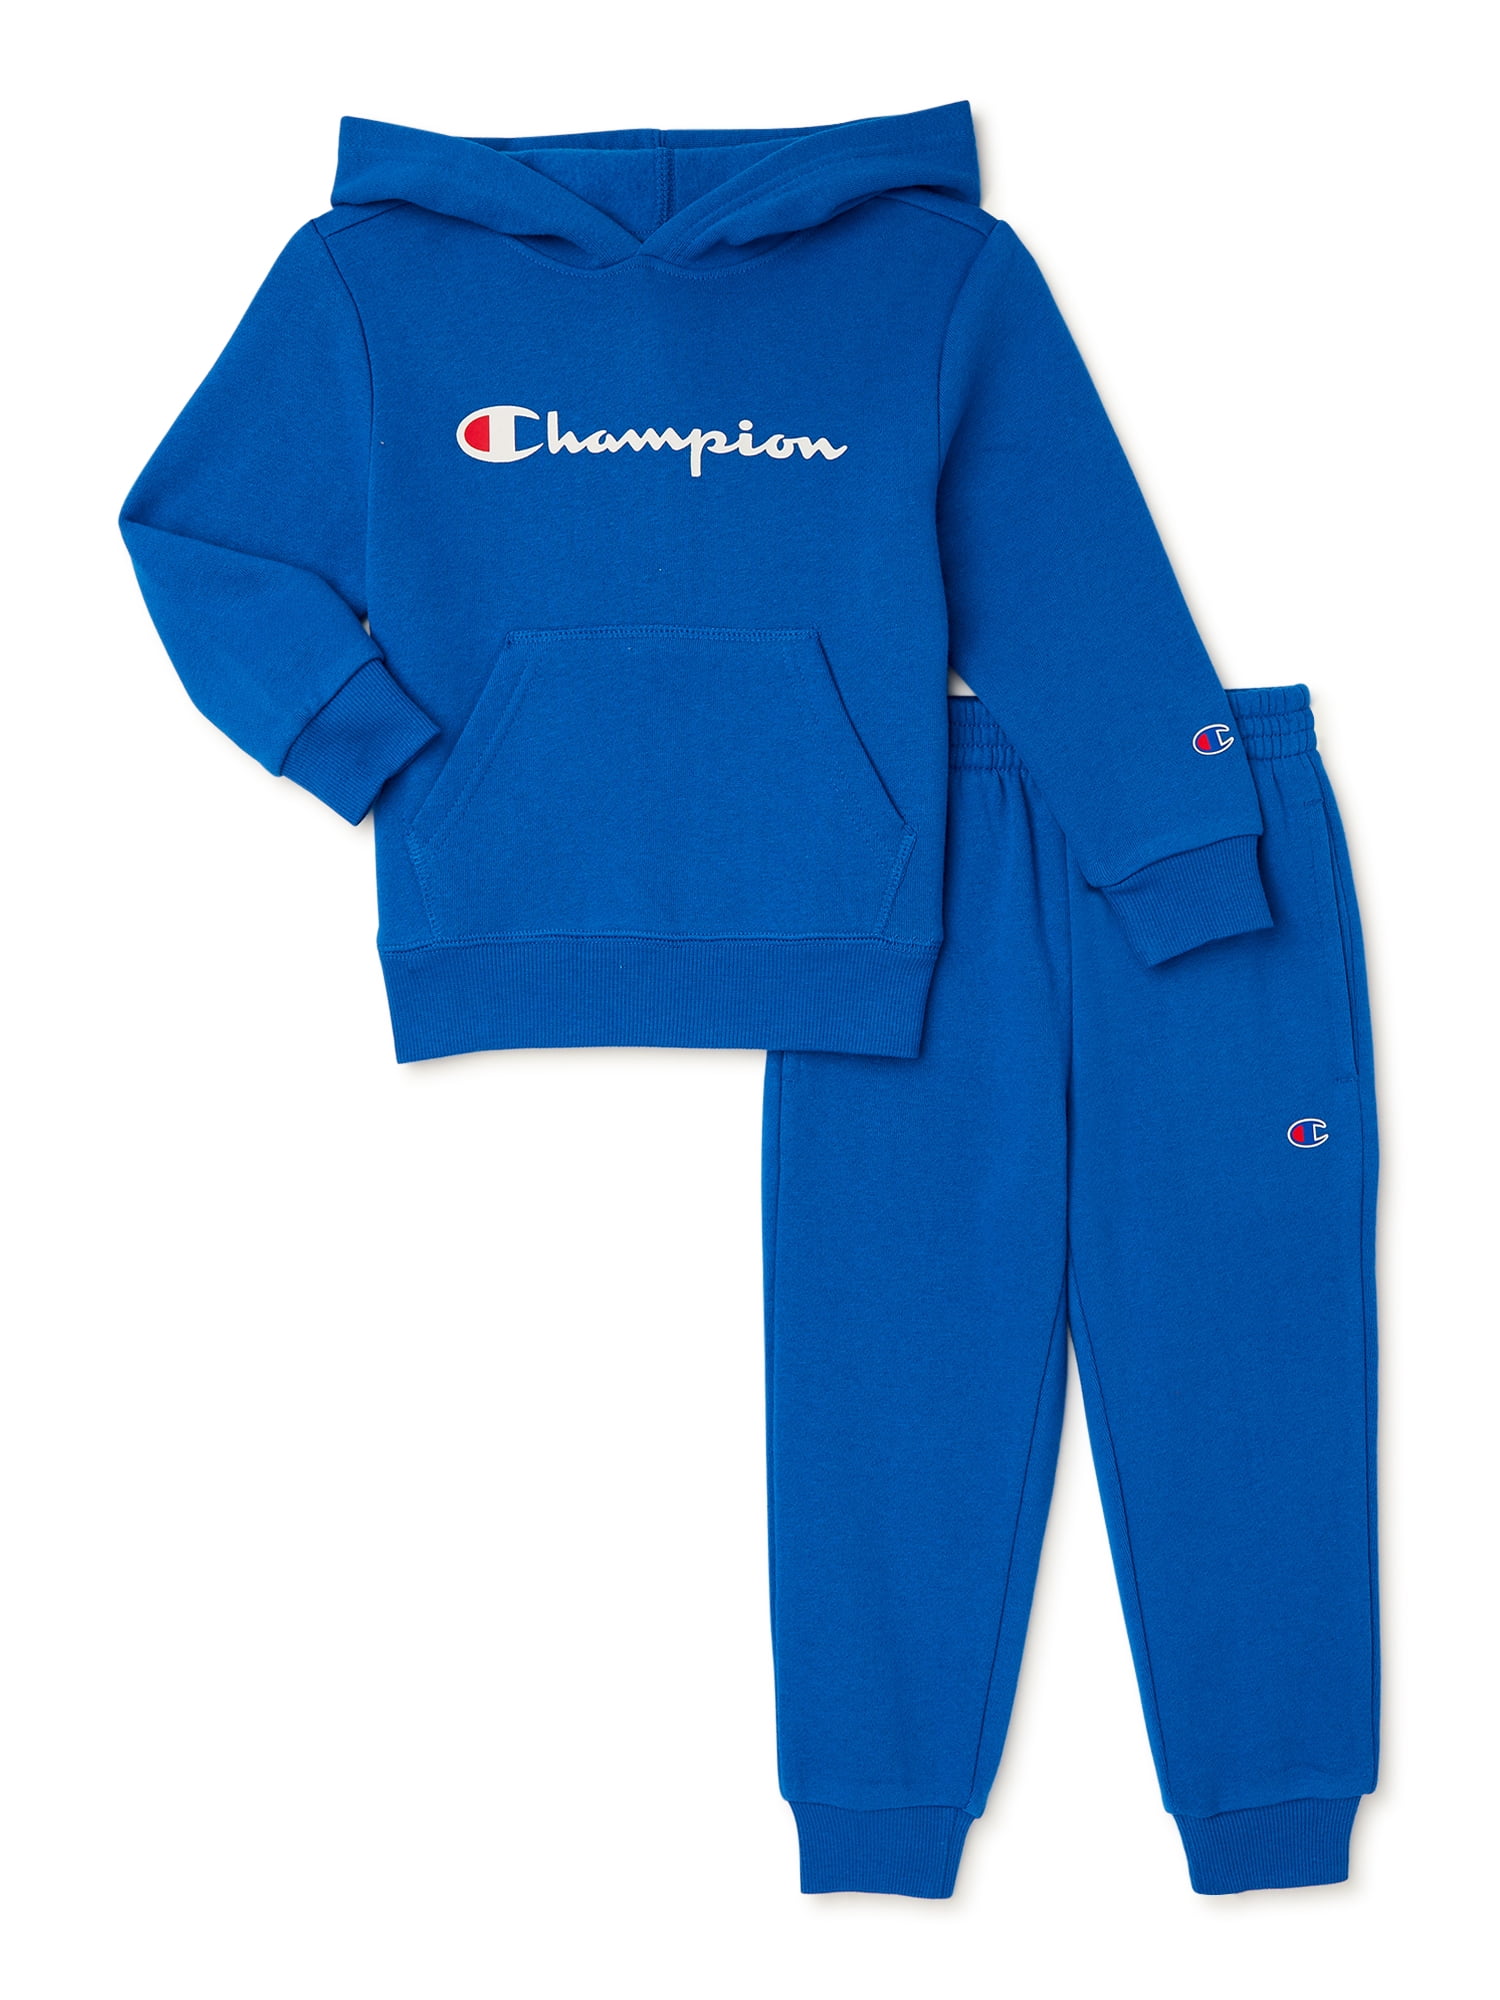 Champion Toddler Boys' Matching Hoodie and Jogger Set, 2-Piece, Size 2T-4T